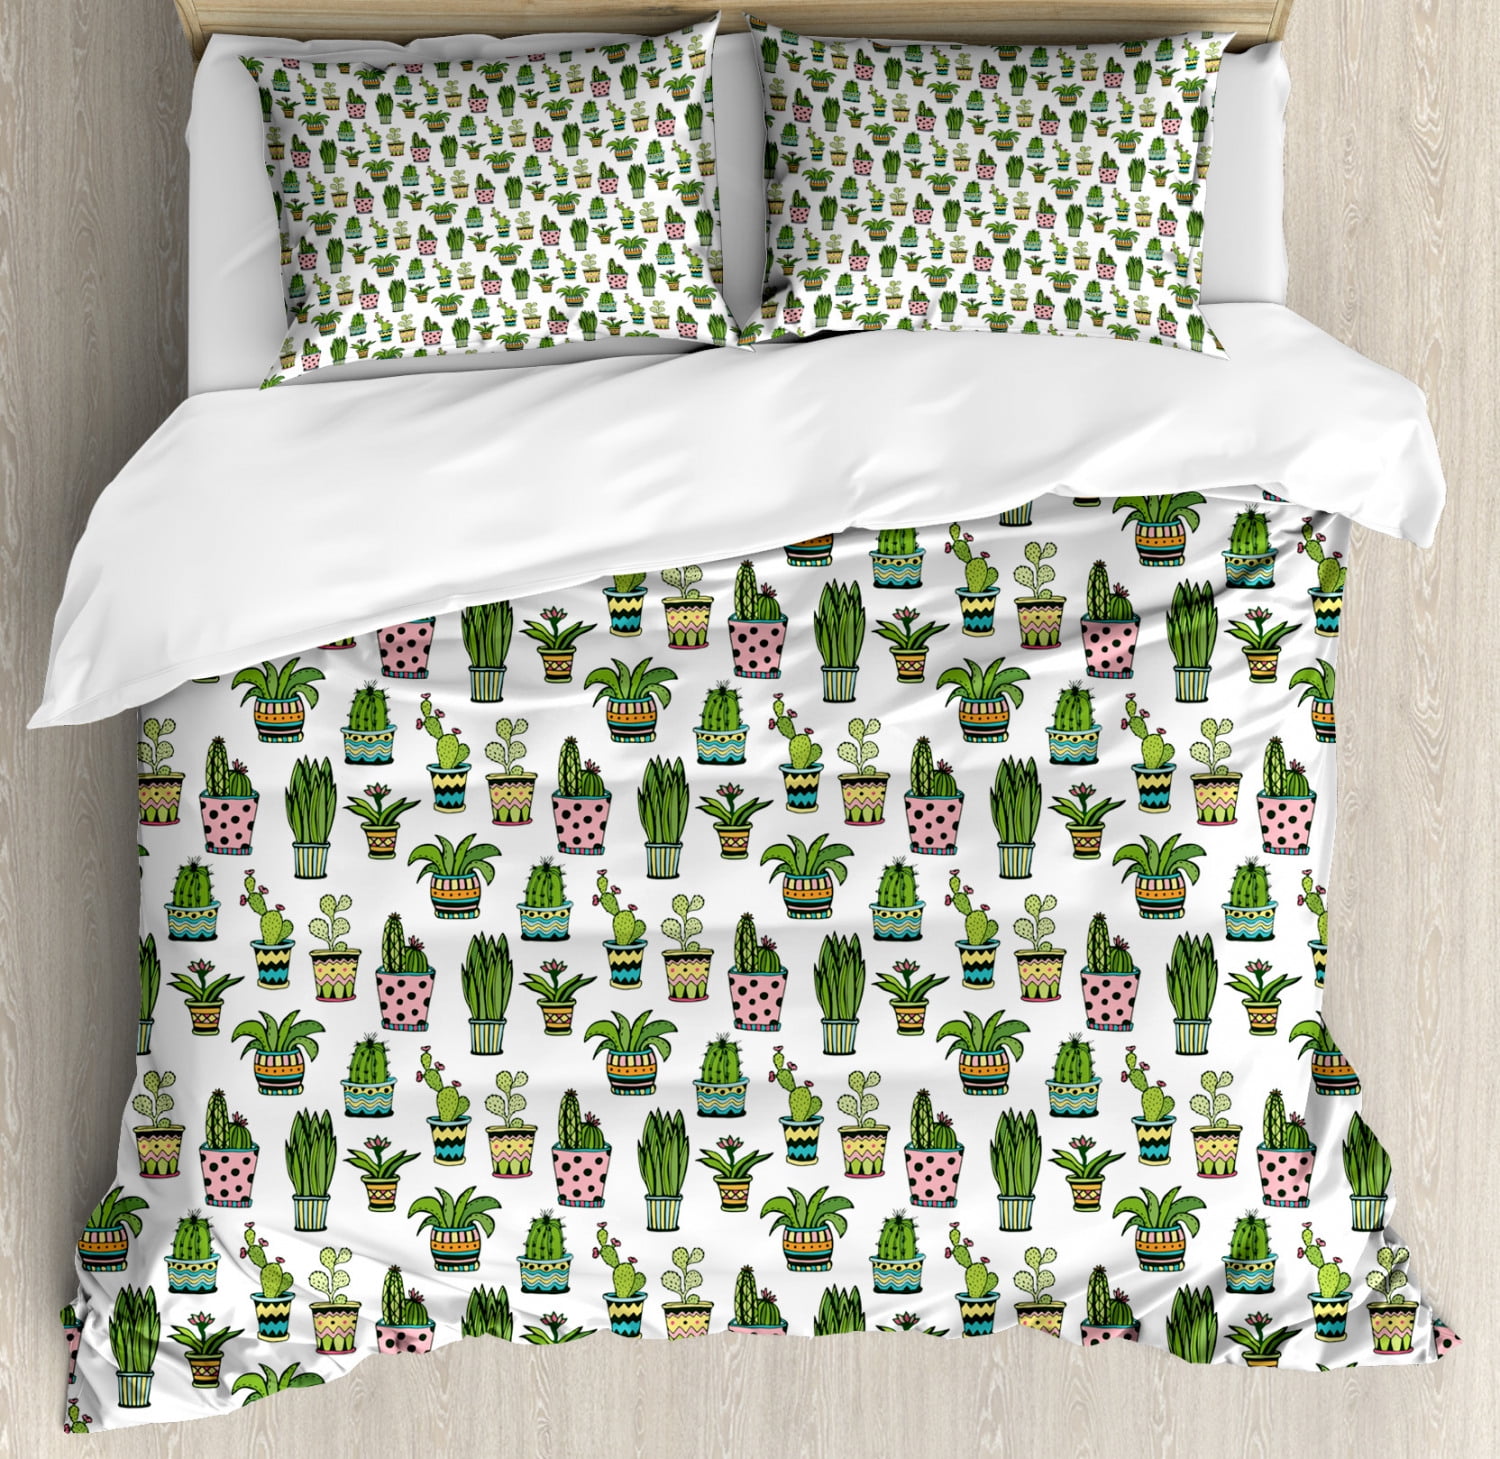 Pastel Green Thorny Vintage Hawaiian Nature Flourishing Succulents and Cactus Bouquets Picture Decorative 3 Piece Bedding Set with 2 Pillow Shams Queen Size Ambesonne Cactus Duvet Cover Set